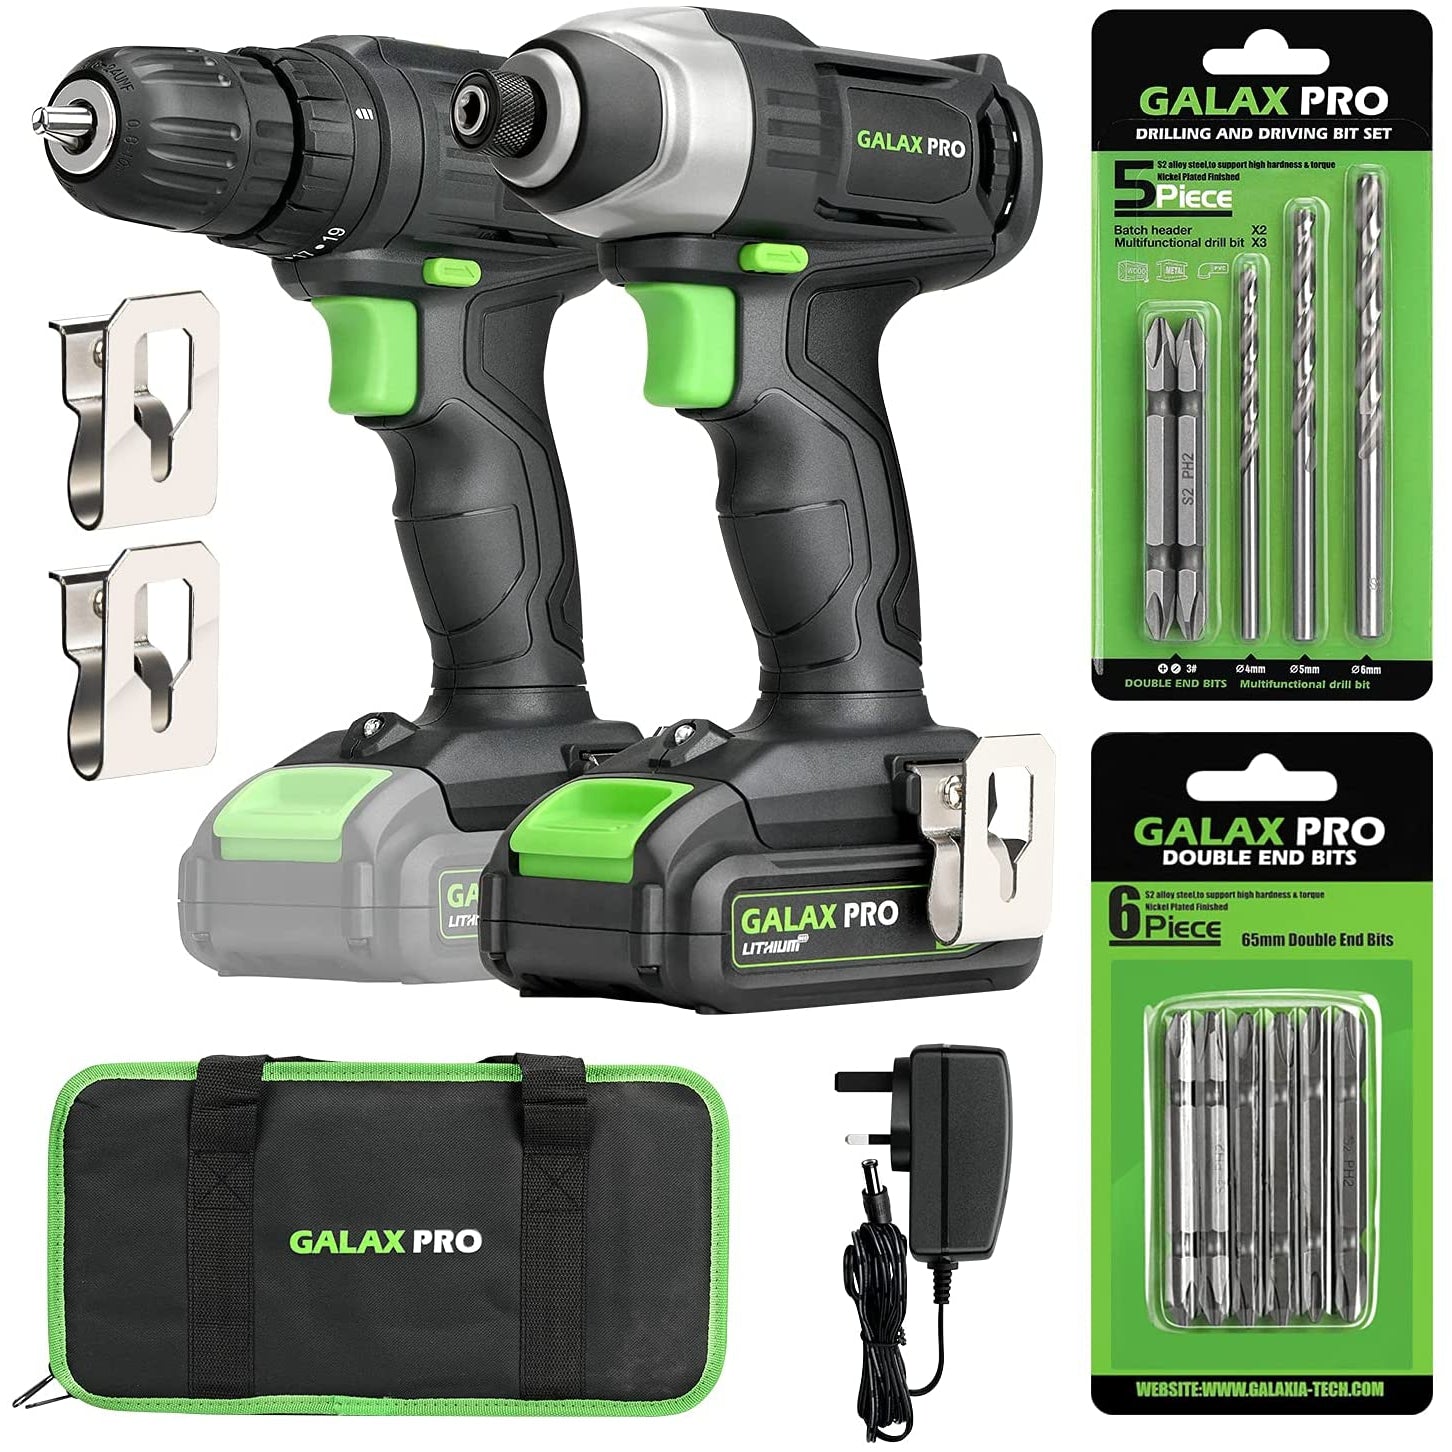 Galax Pro D6001 2-speeds Drill Driver and Impact Driver Combo Kit, 11pcs Accessories and Tool Bag